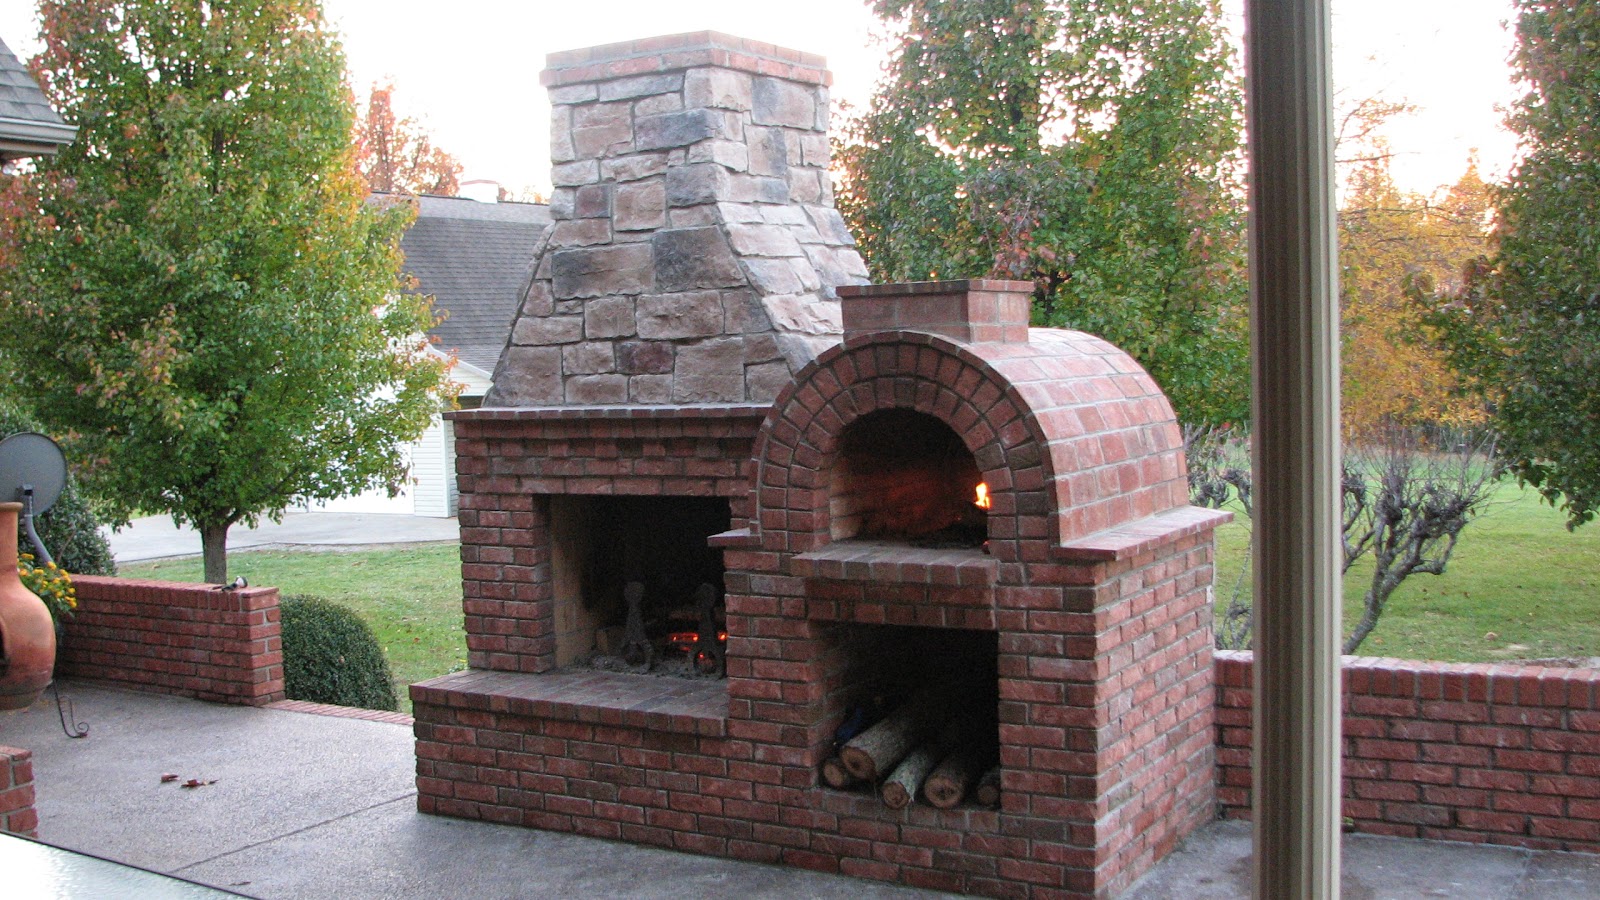 brickwood ovens riley wood fired brick pizza oven and fireplace